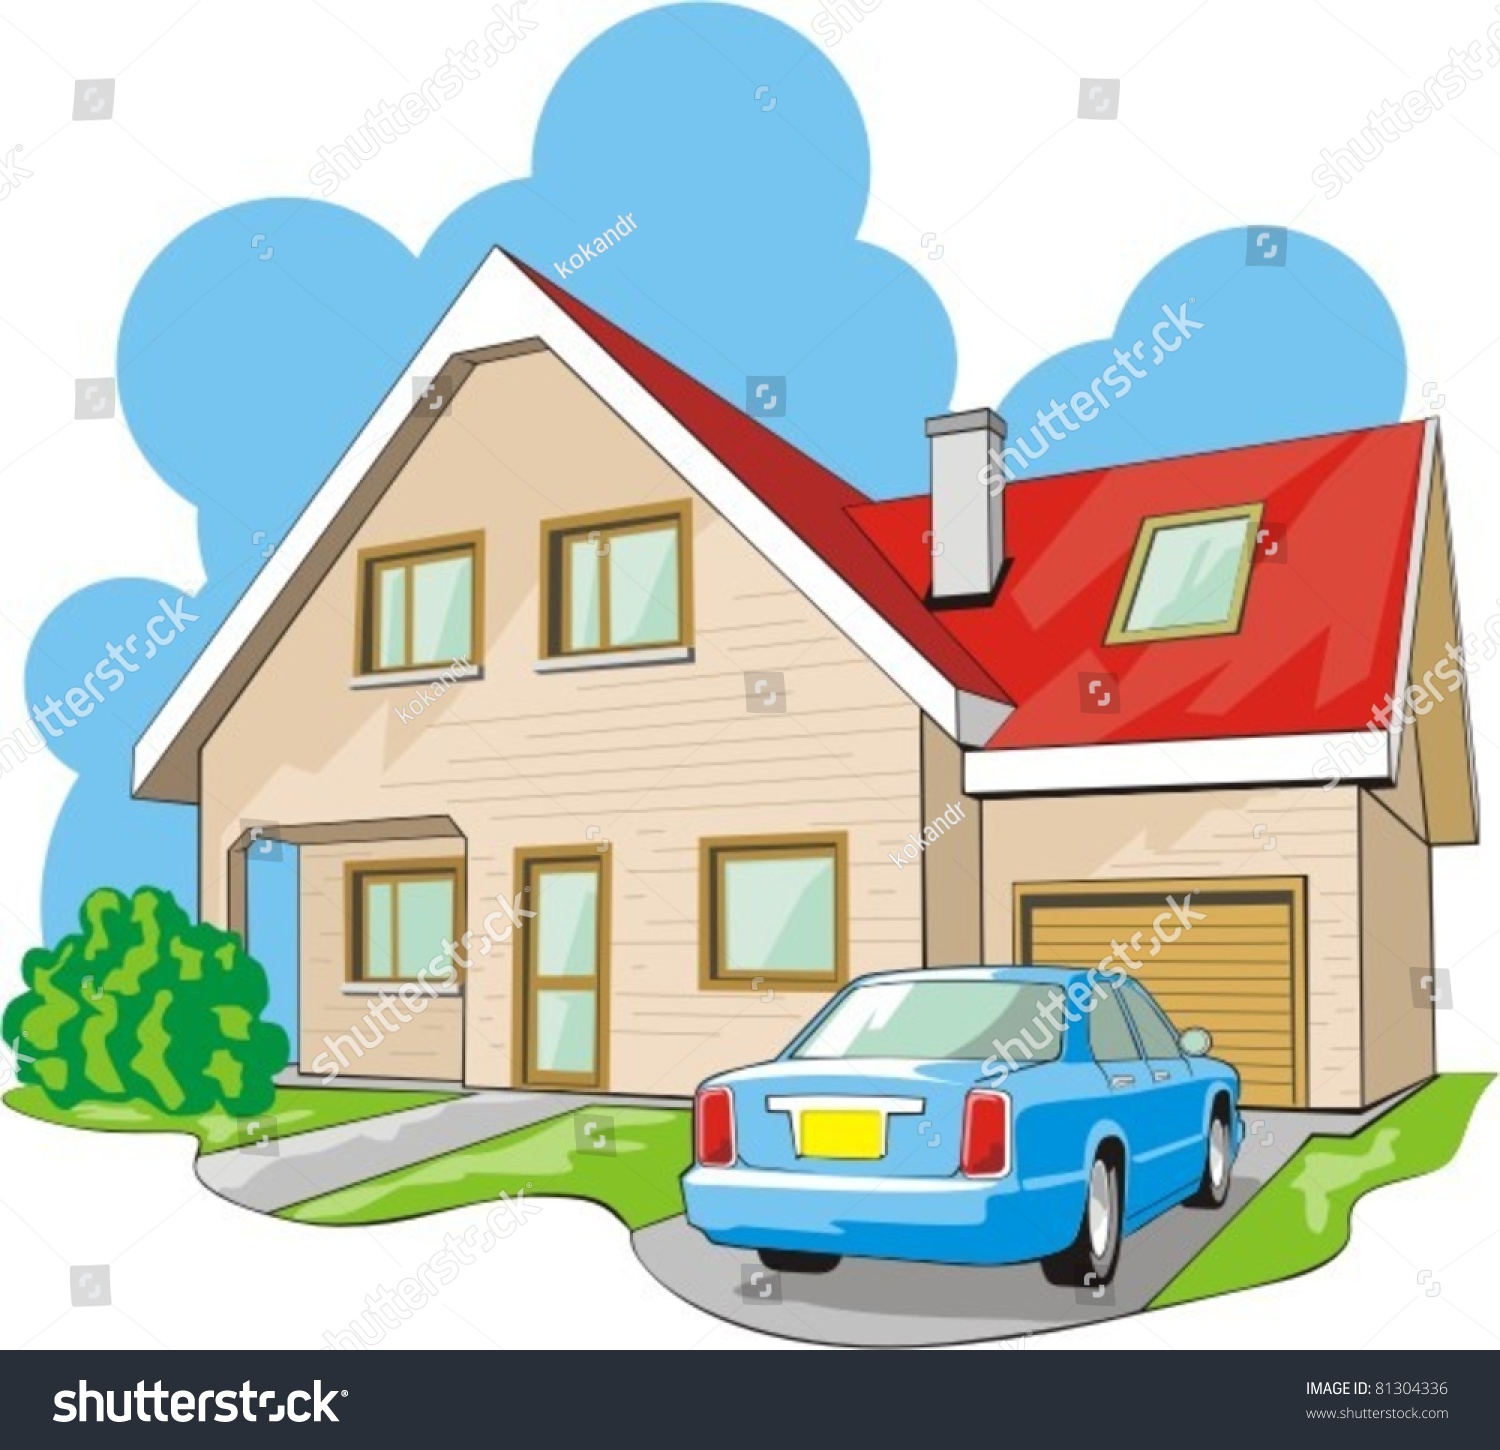 two storey house clipart - photo #5